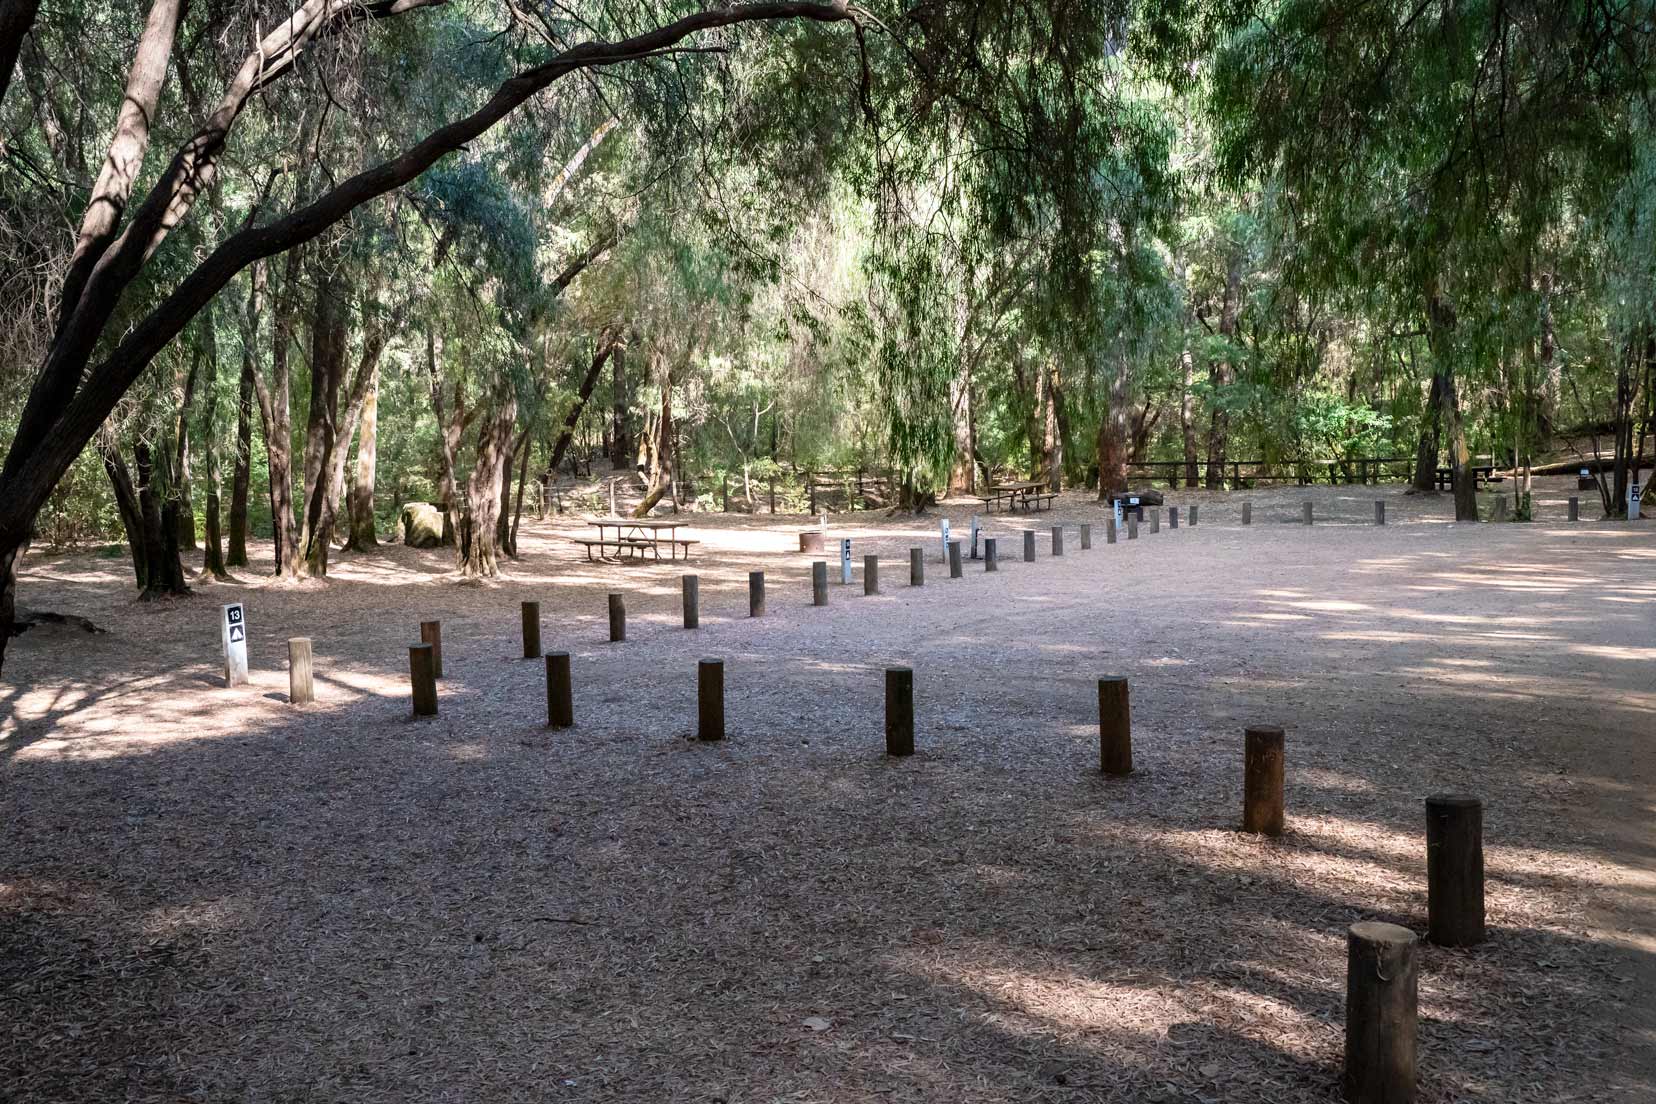 Campsites 13,14, 15 parking area with wooden bollards separating the parking area and area where the picnic table is 